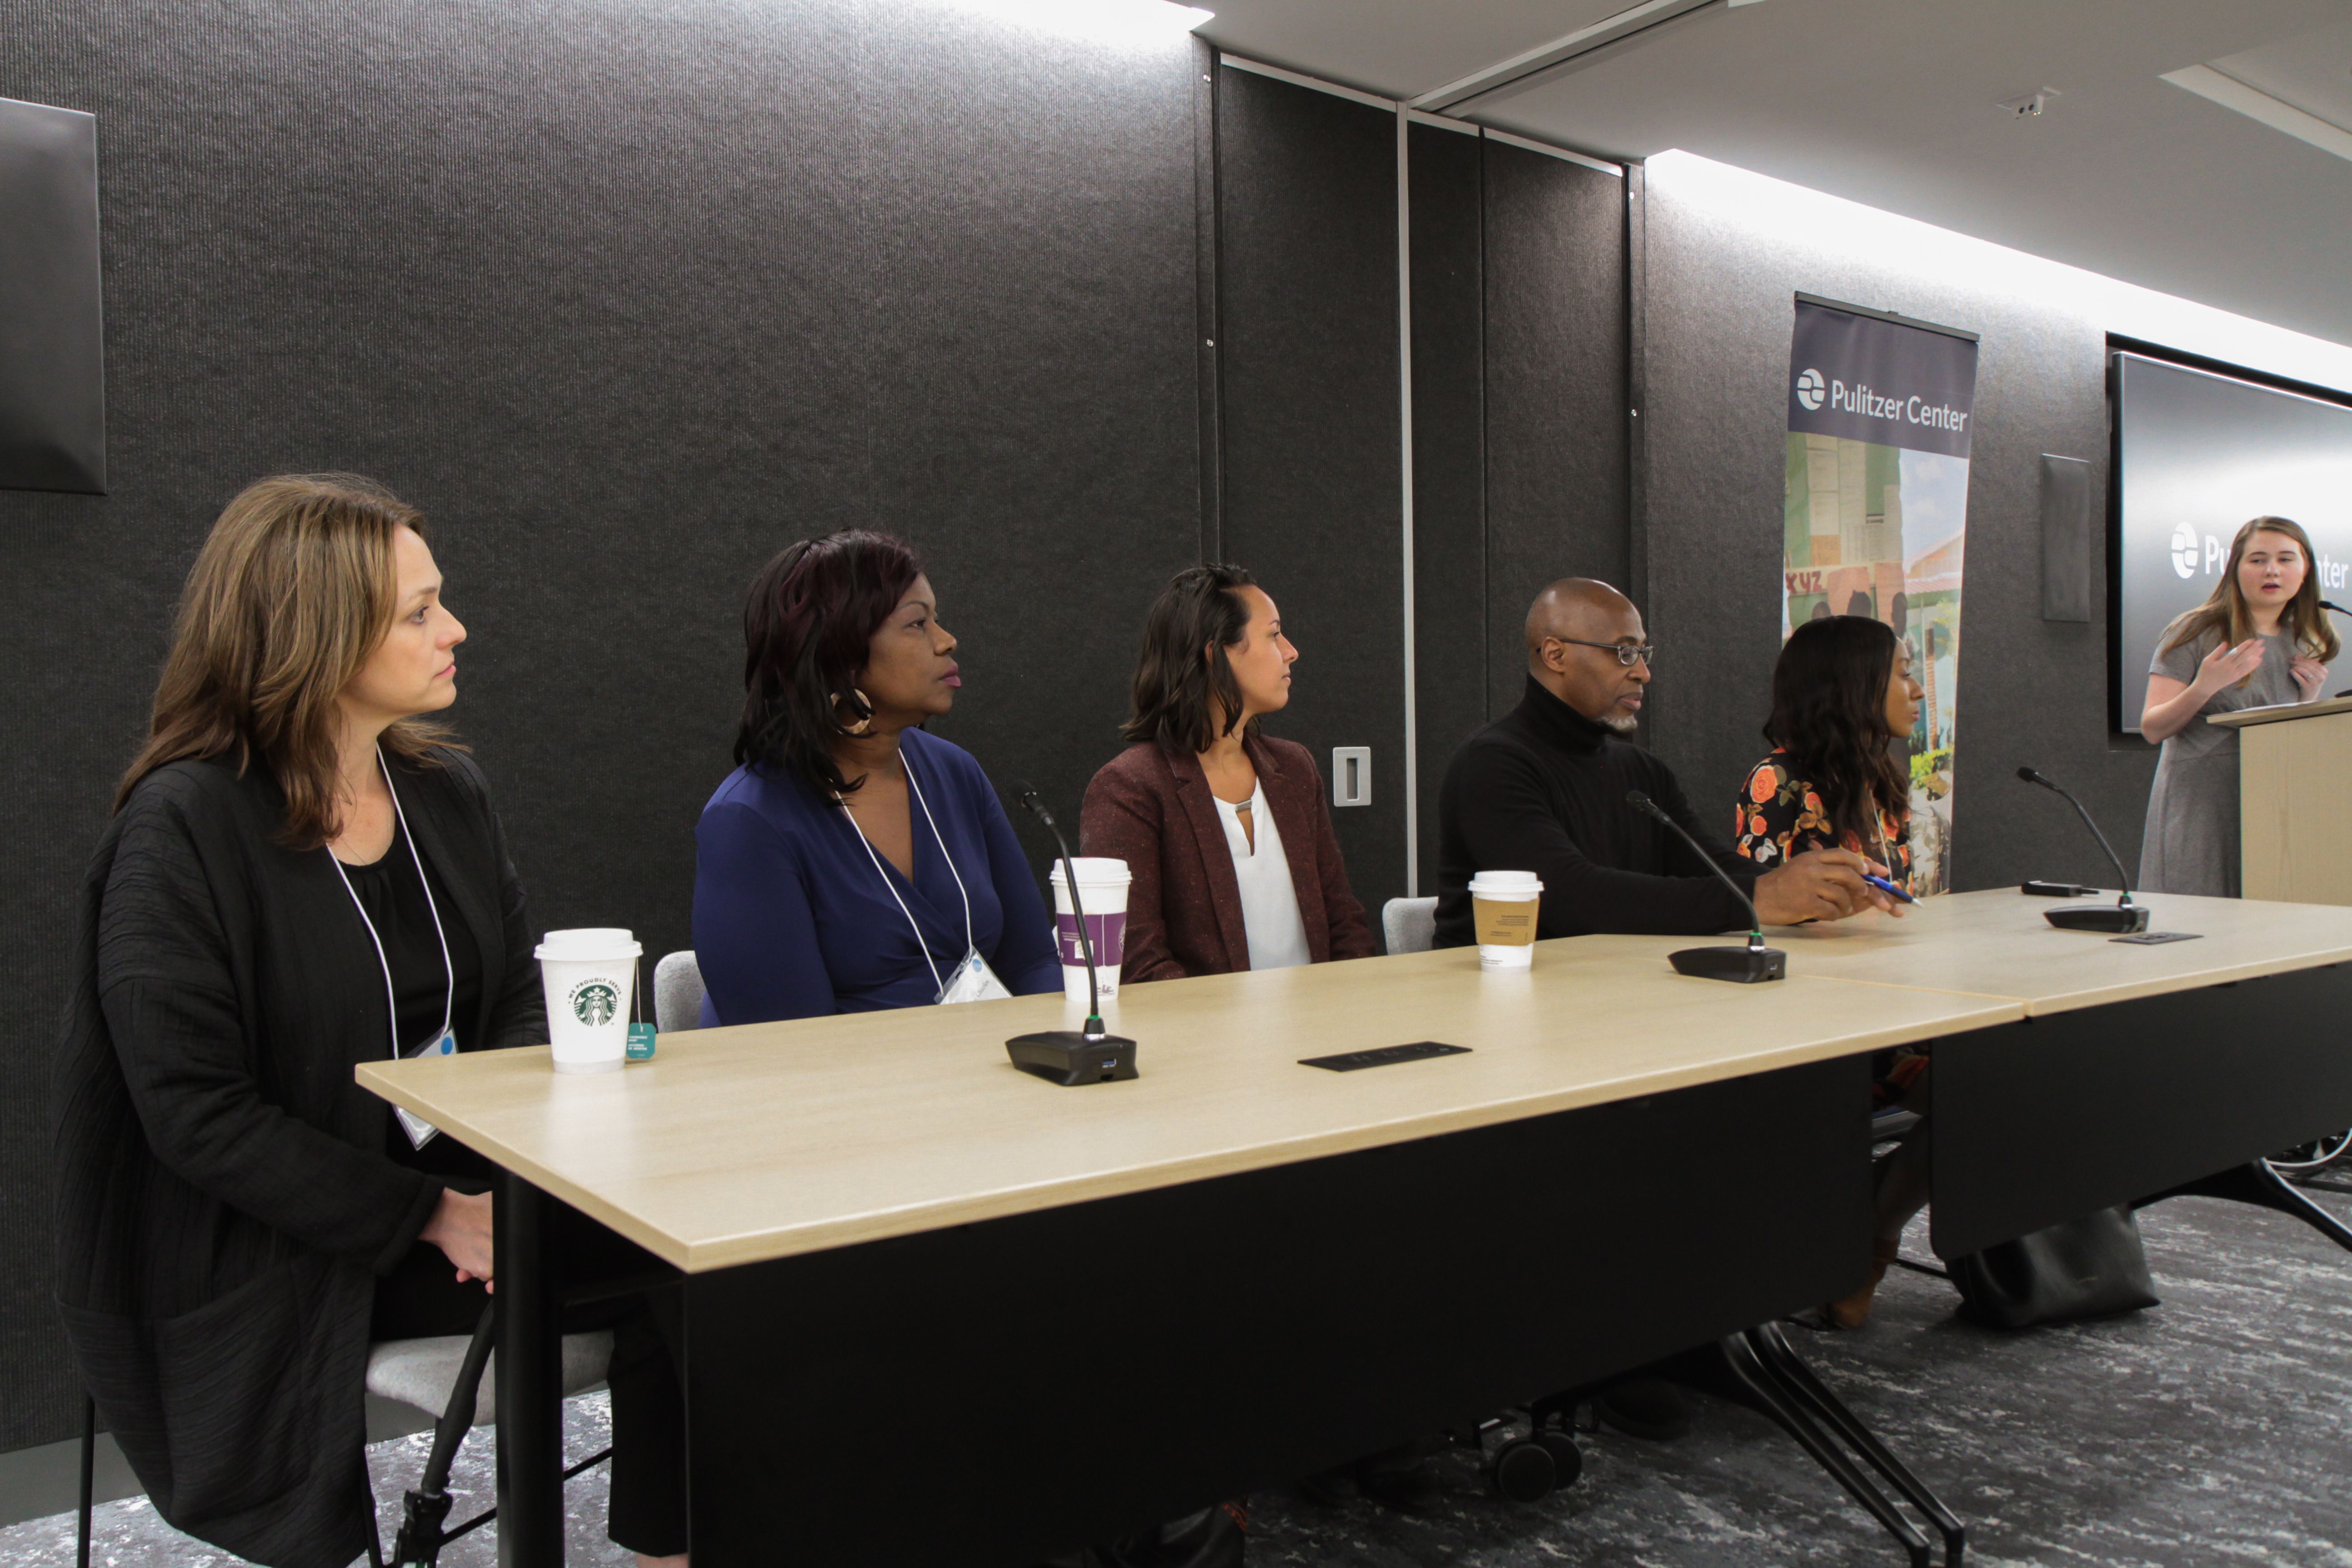 Pulitzer Center outreach coordinator Holly Piepenburg introduces the five panelists. From left to right: Time for Kids executive editor Jaime Joyce; Miami Herald correspondent Jacqueline Charles; digital video producer for National Geographic Gabrielle Ewing; senior investigative reporter for WGBH Phillip Martin; and multimedia reporter Melissa Noel. Image by Libby Moeller. United States, 2019.